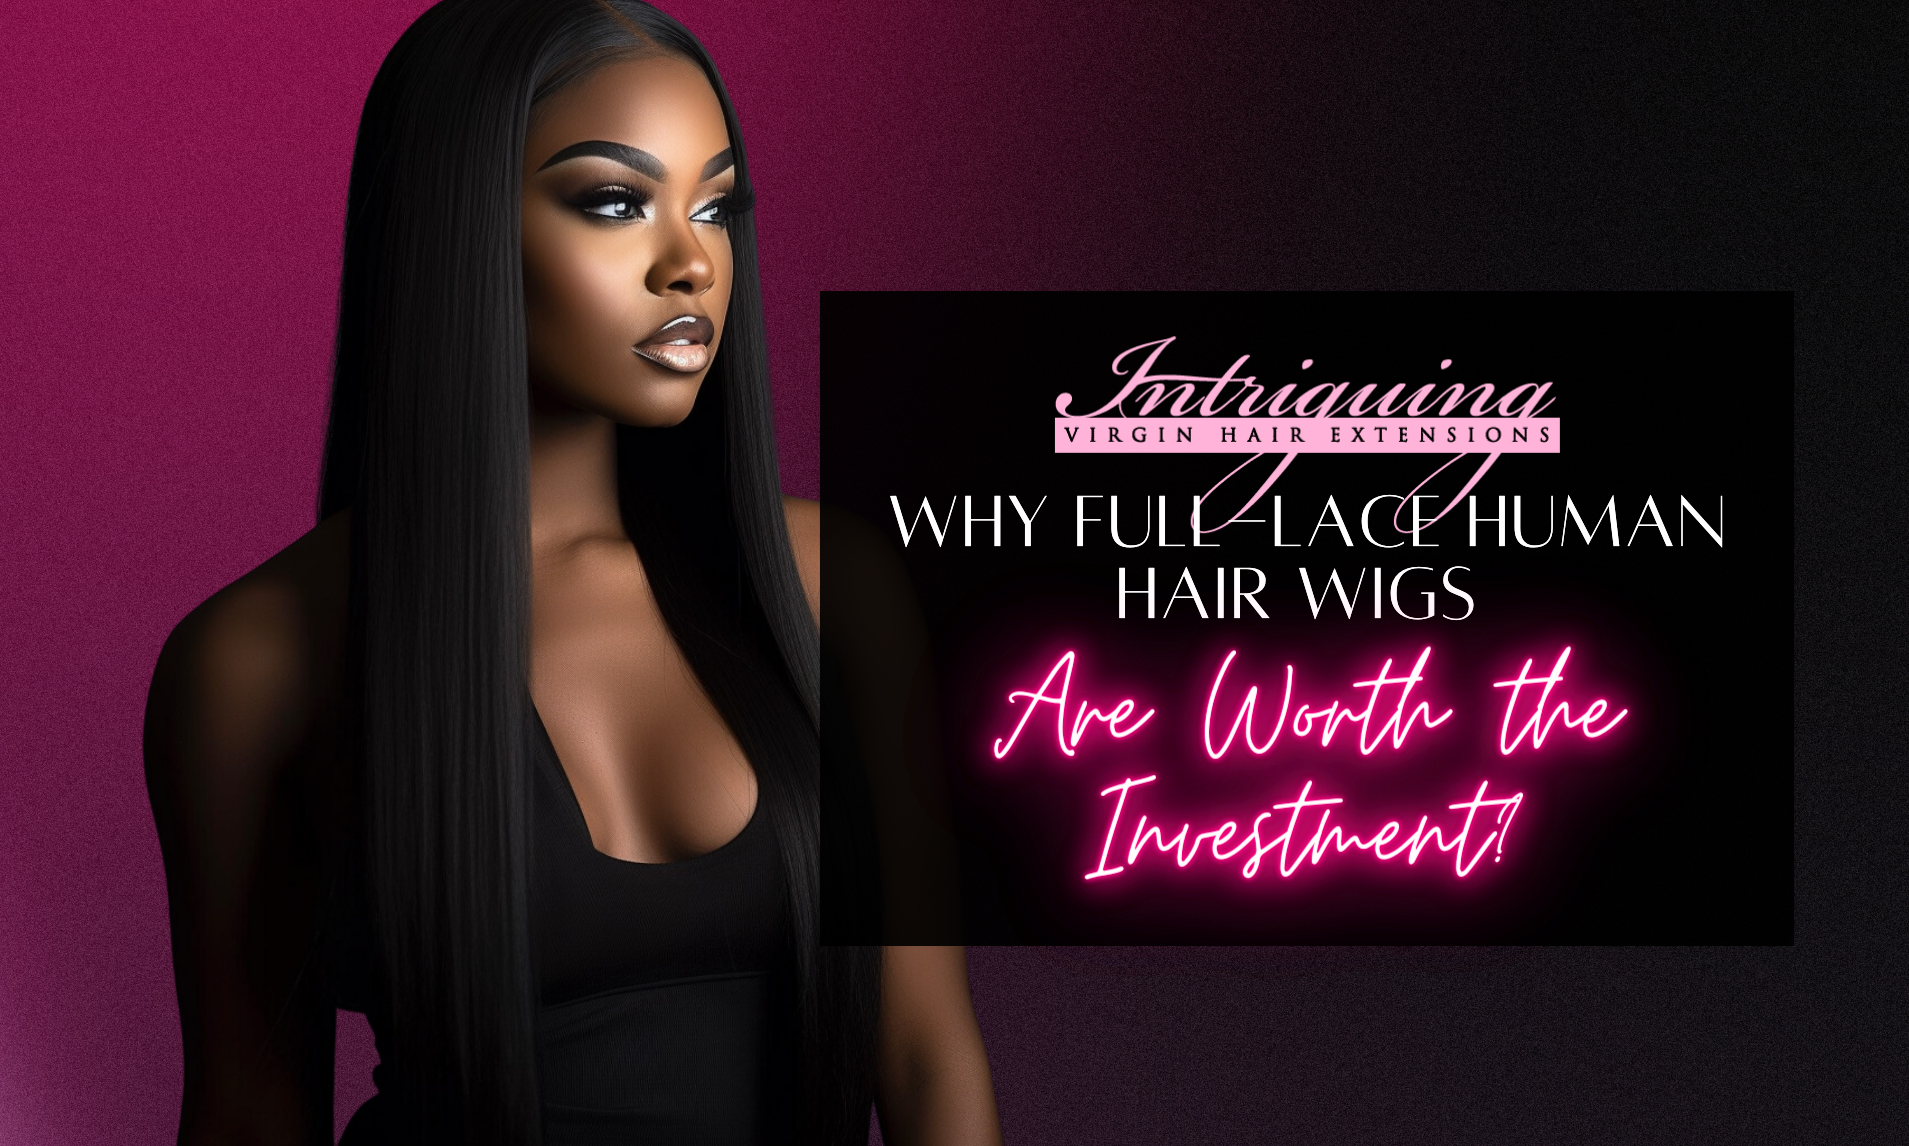 Why Full-Lace Human Hair Wigs Are Worth the Investment?